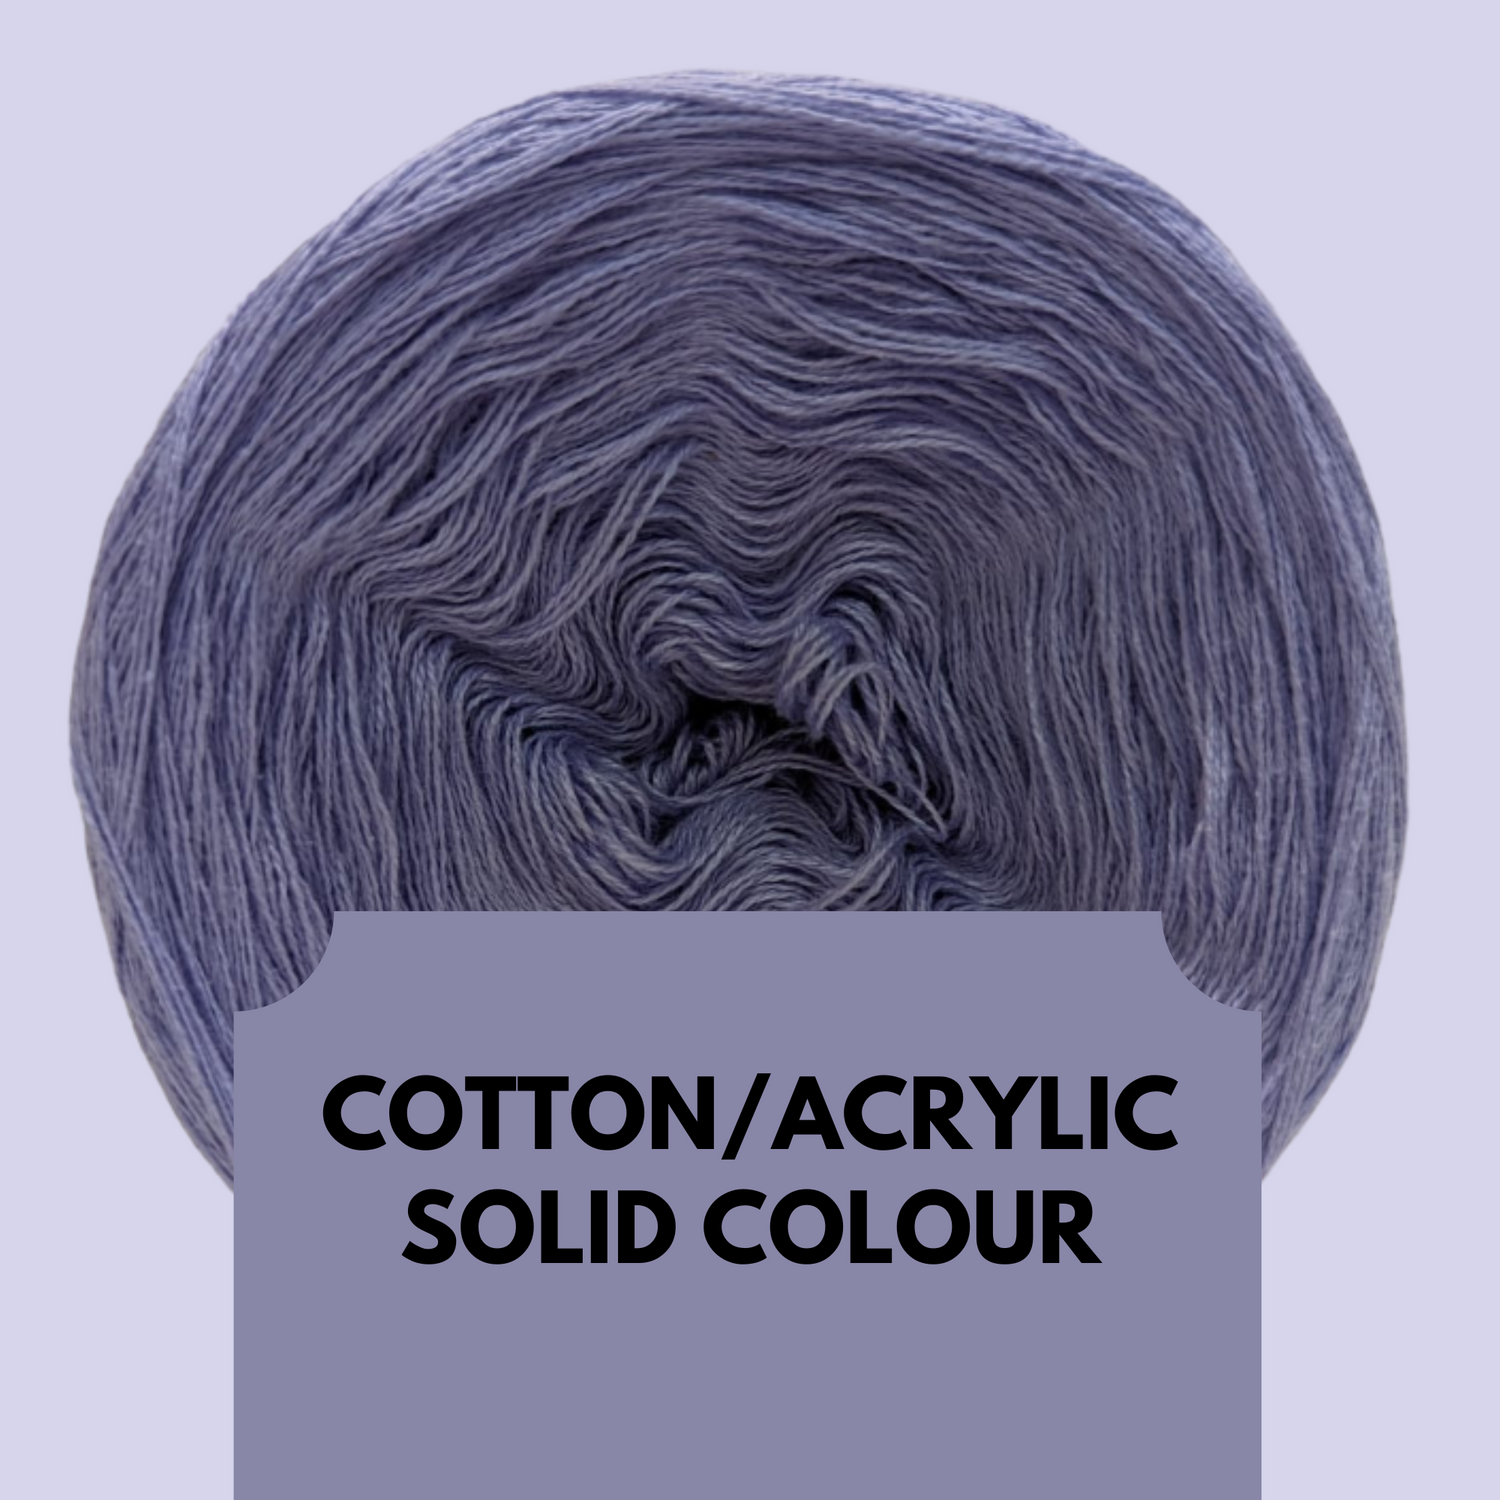 Cotton/Acrylic Solid Colours